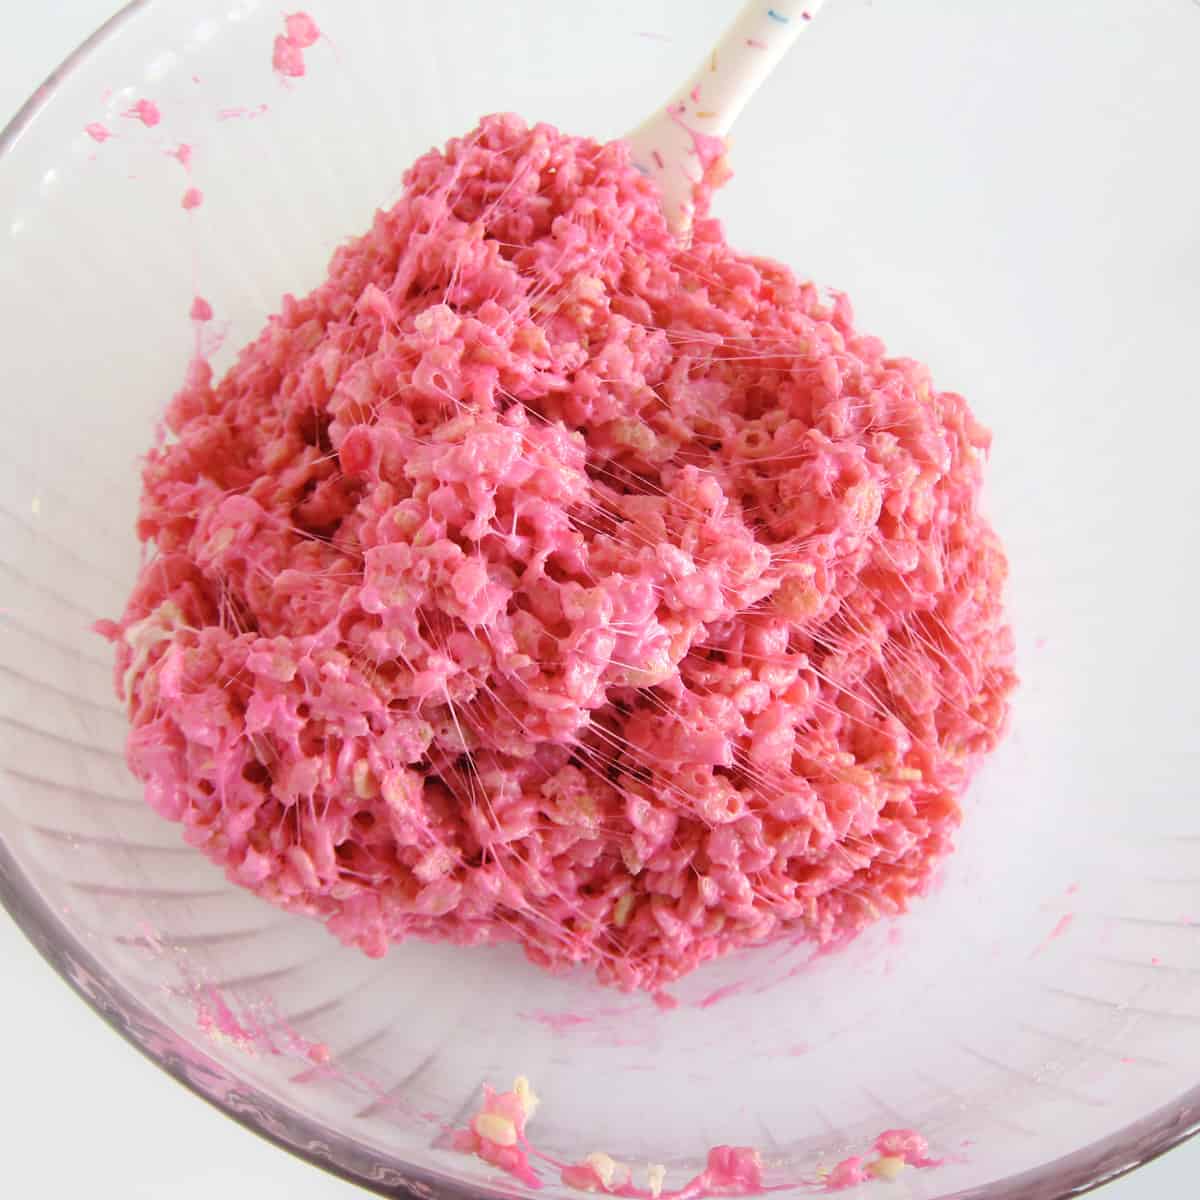 neon pink colored rice krispie treat mixture in a bowl